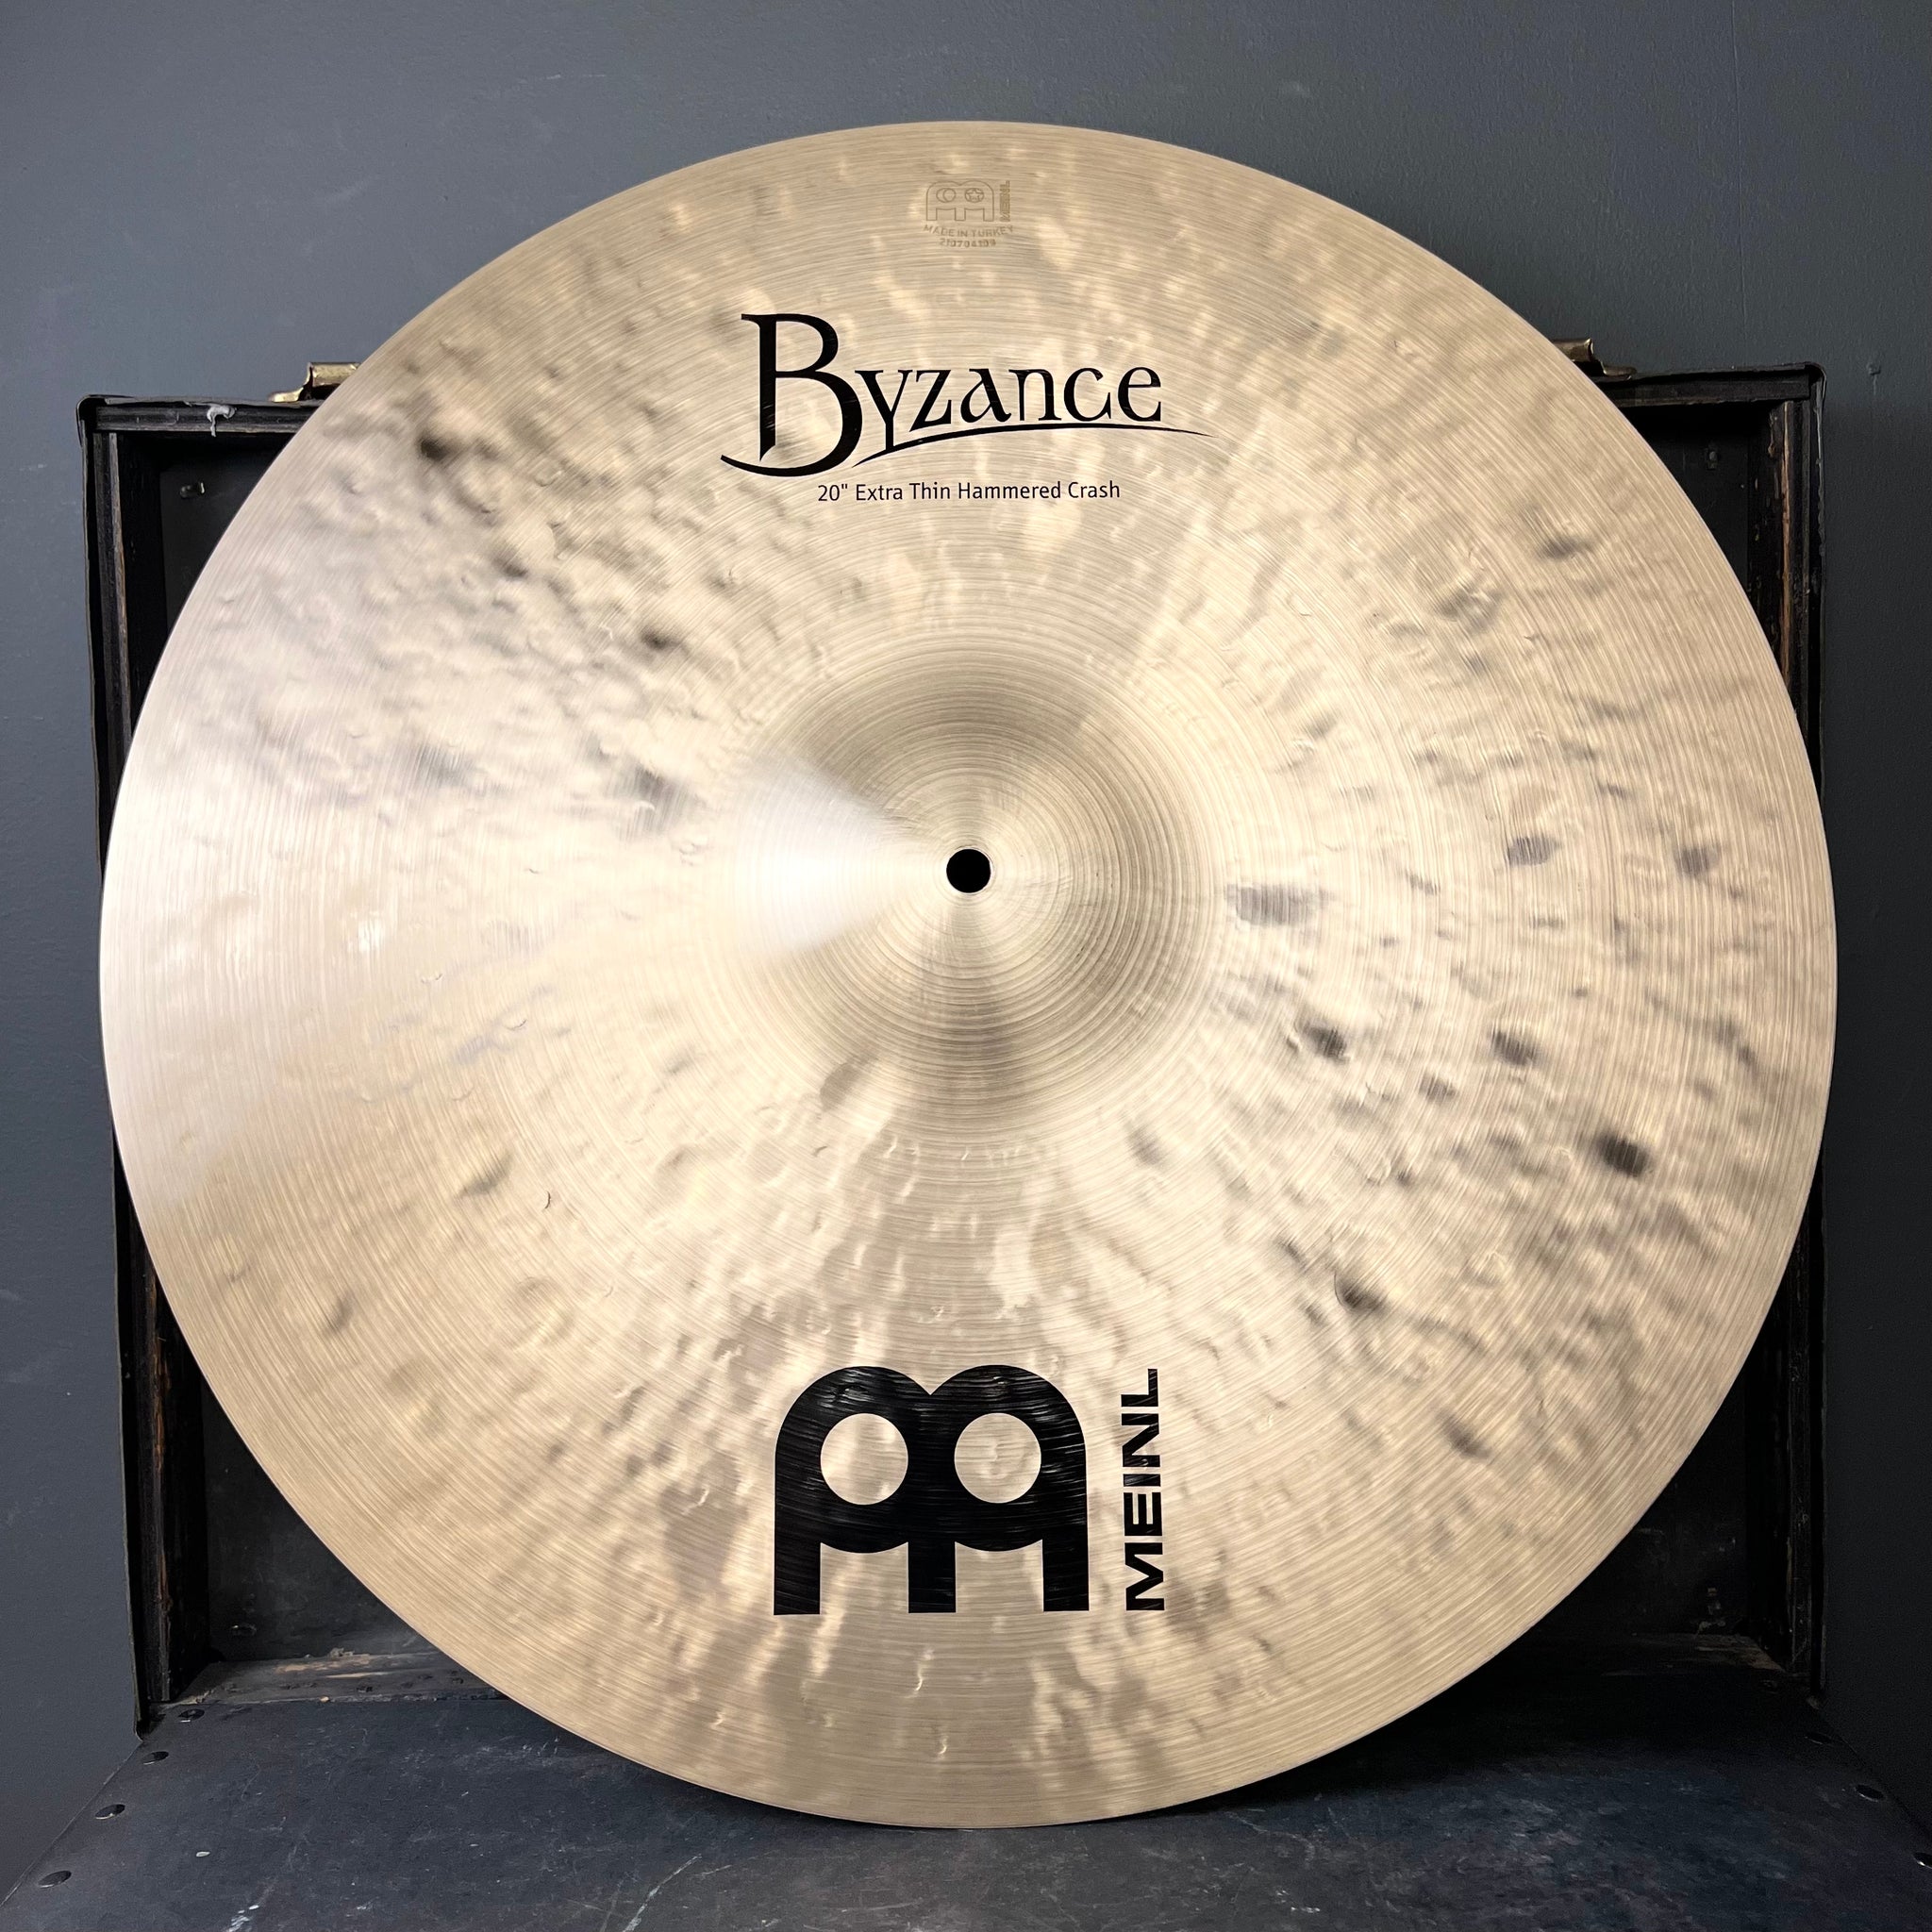 NEW Meinl 20" Byzance Traditional Extra-Thin Hammered Crash Cymbal - 1594g